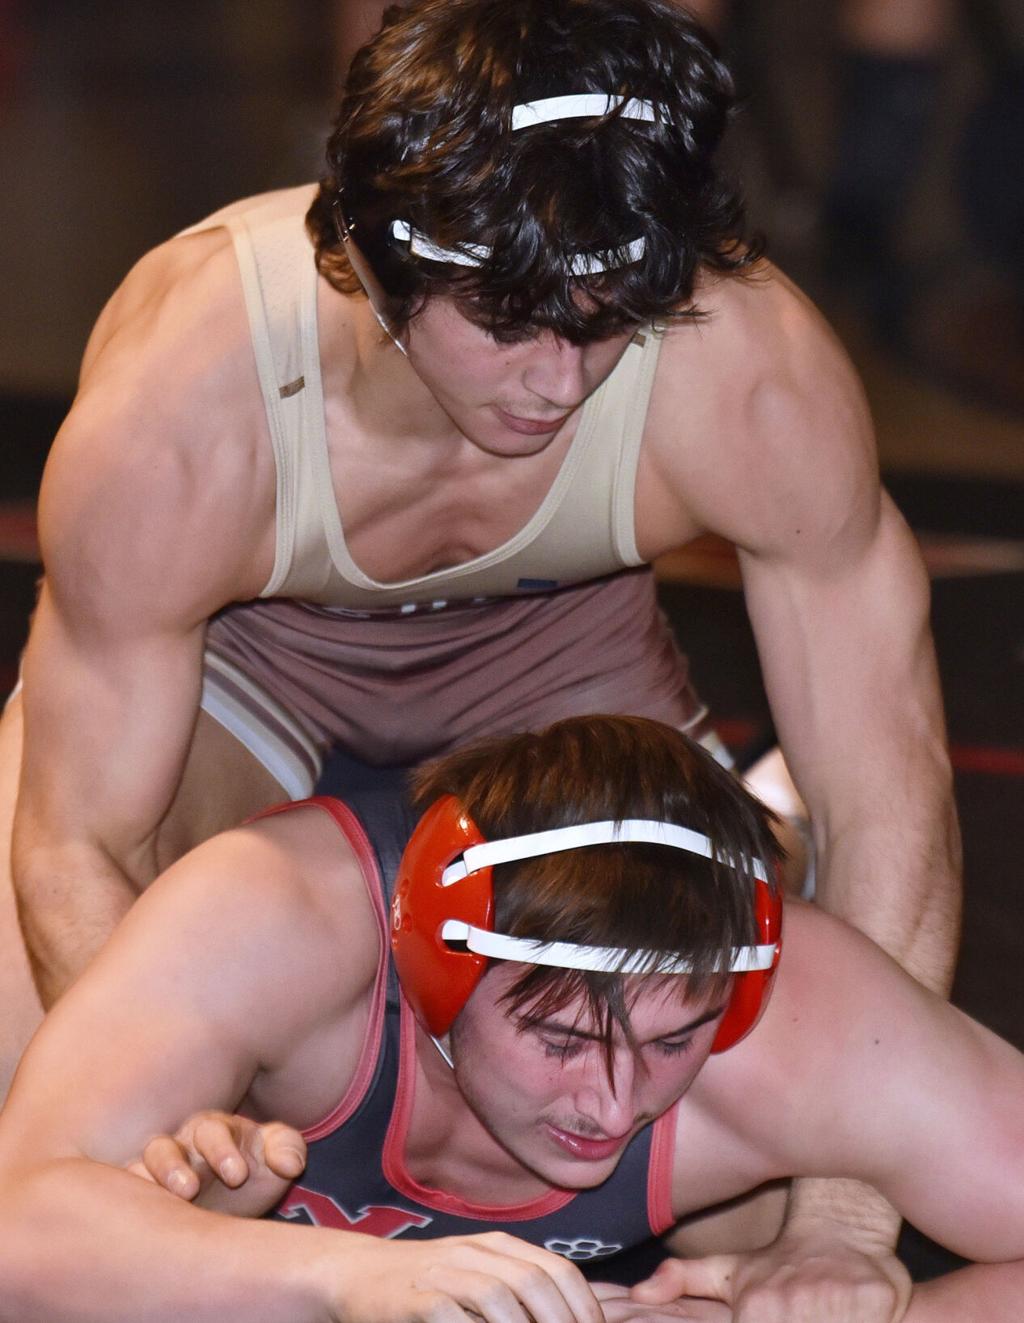 Central’s Blanchette, Hillies’ Nicolosi ready for last challenge at New Englands